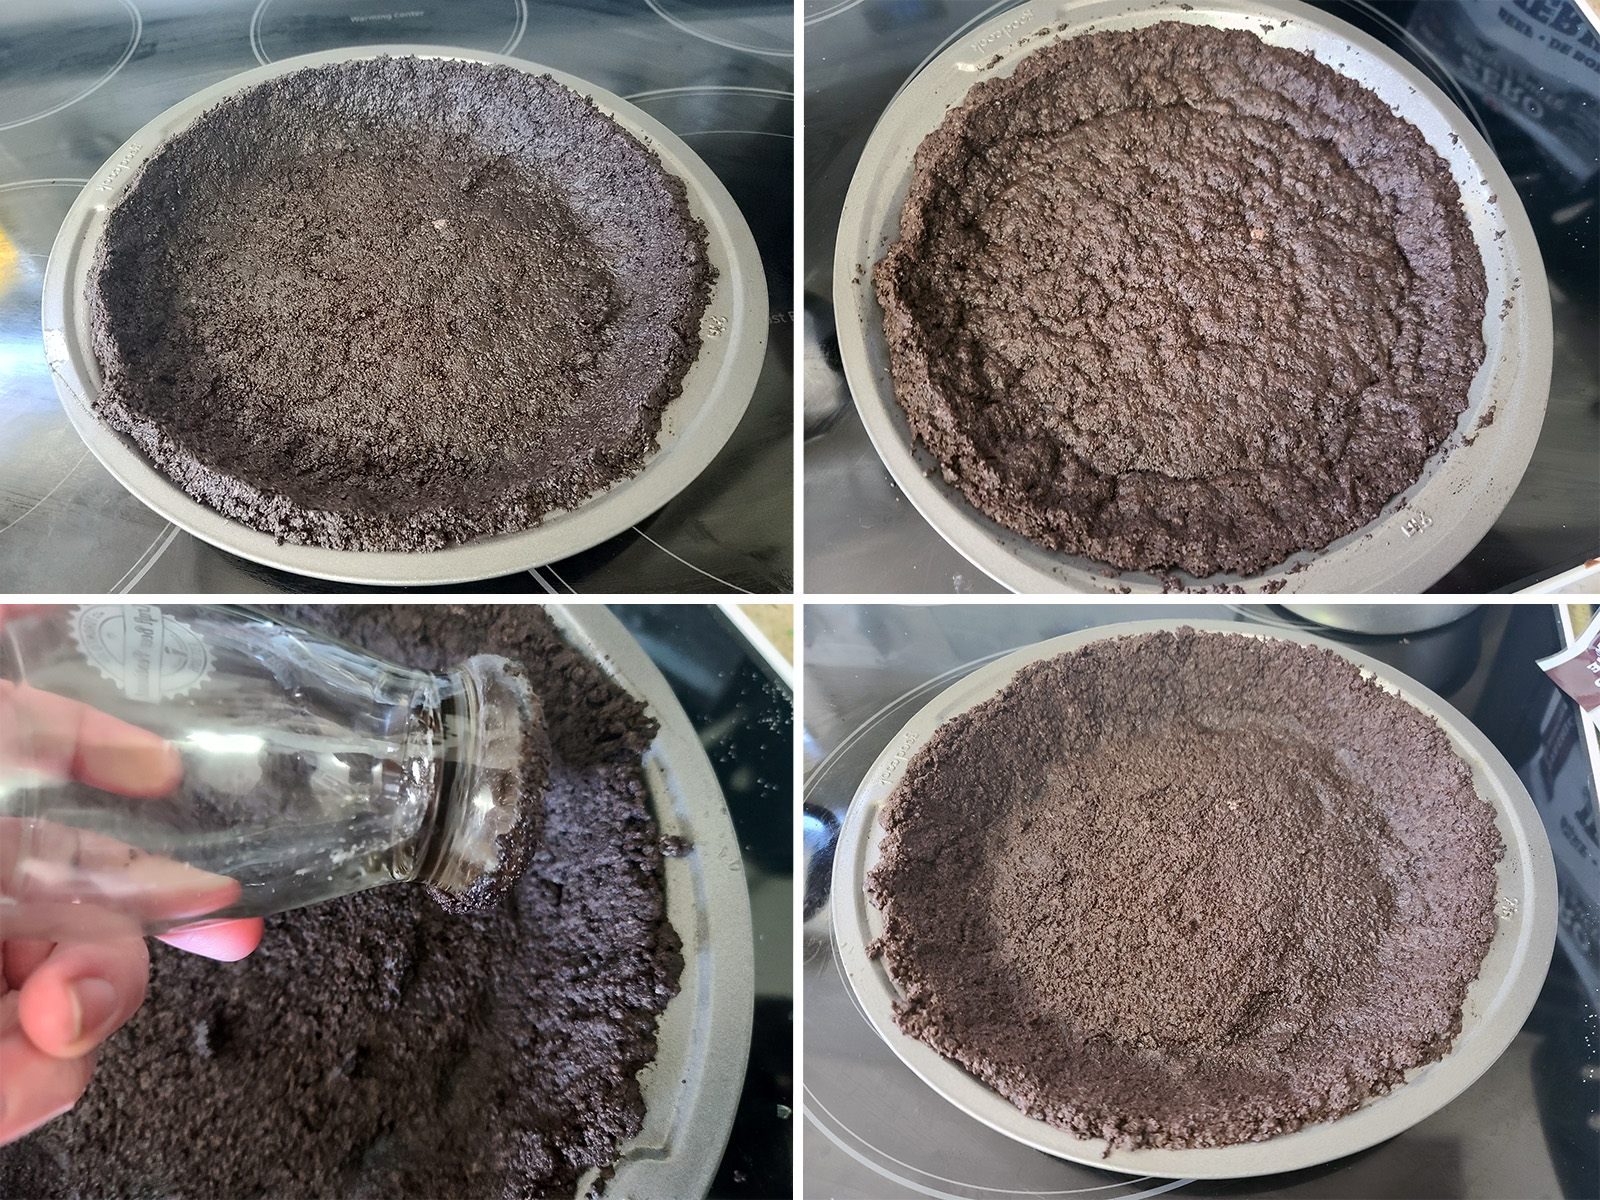 A 4 part image showing a baked oreo cookie crust before and after baking, and being pressed back into shape.